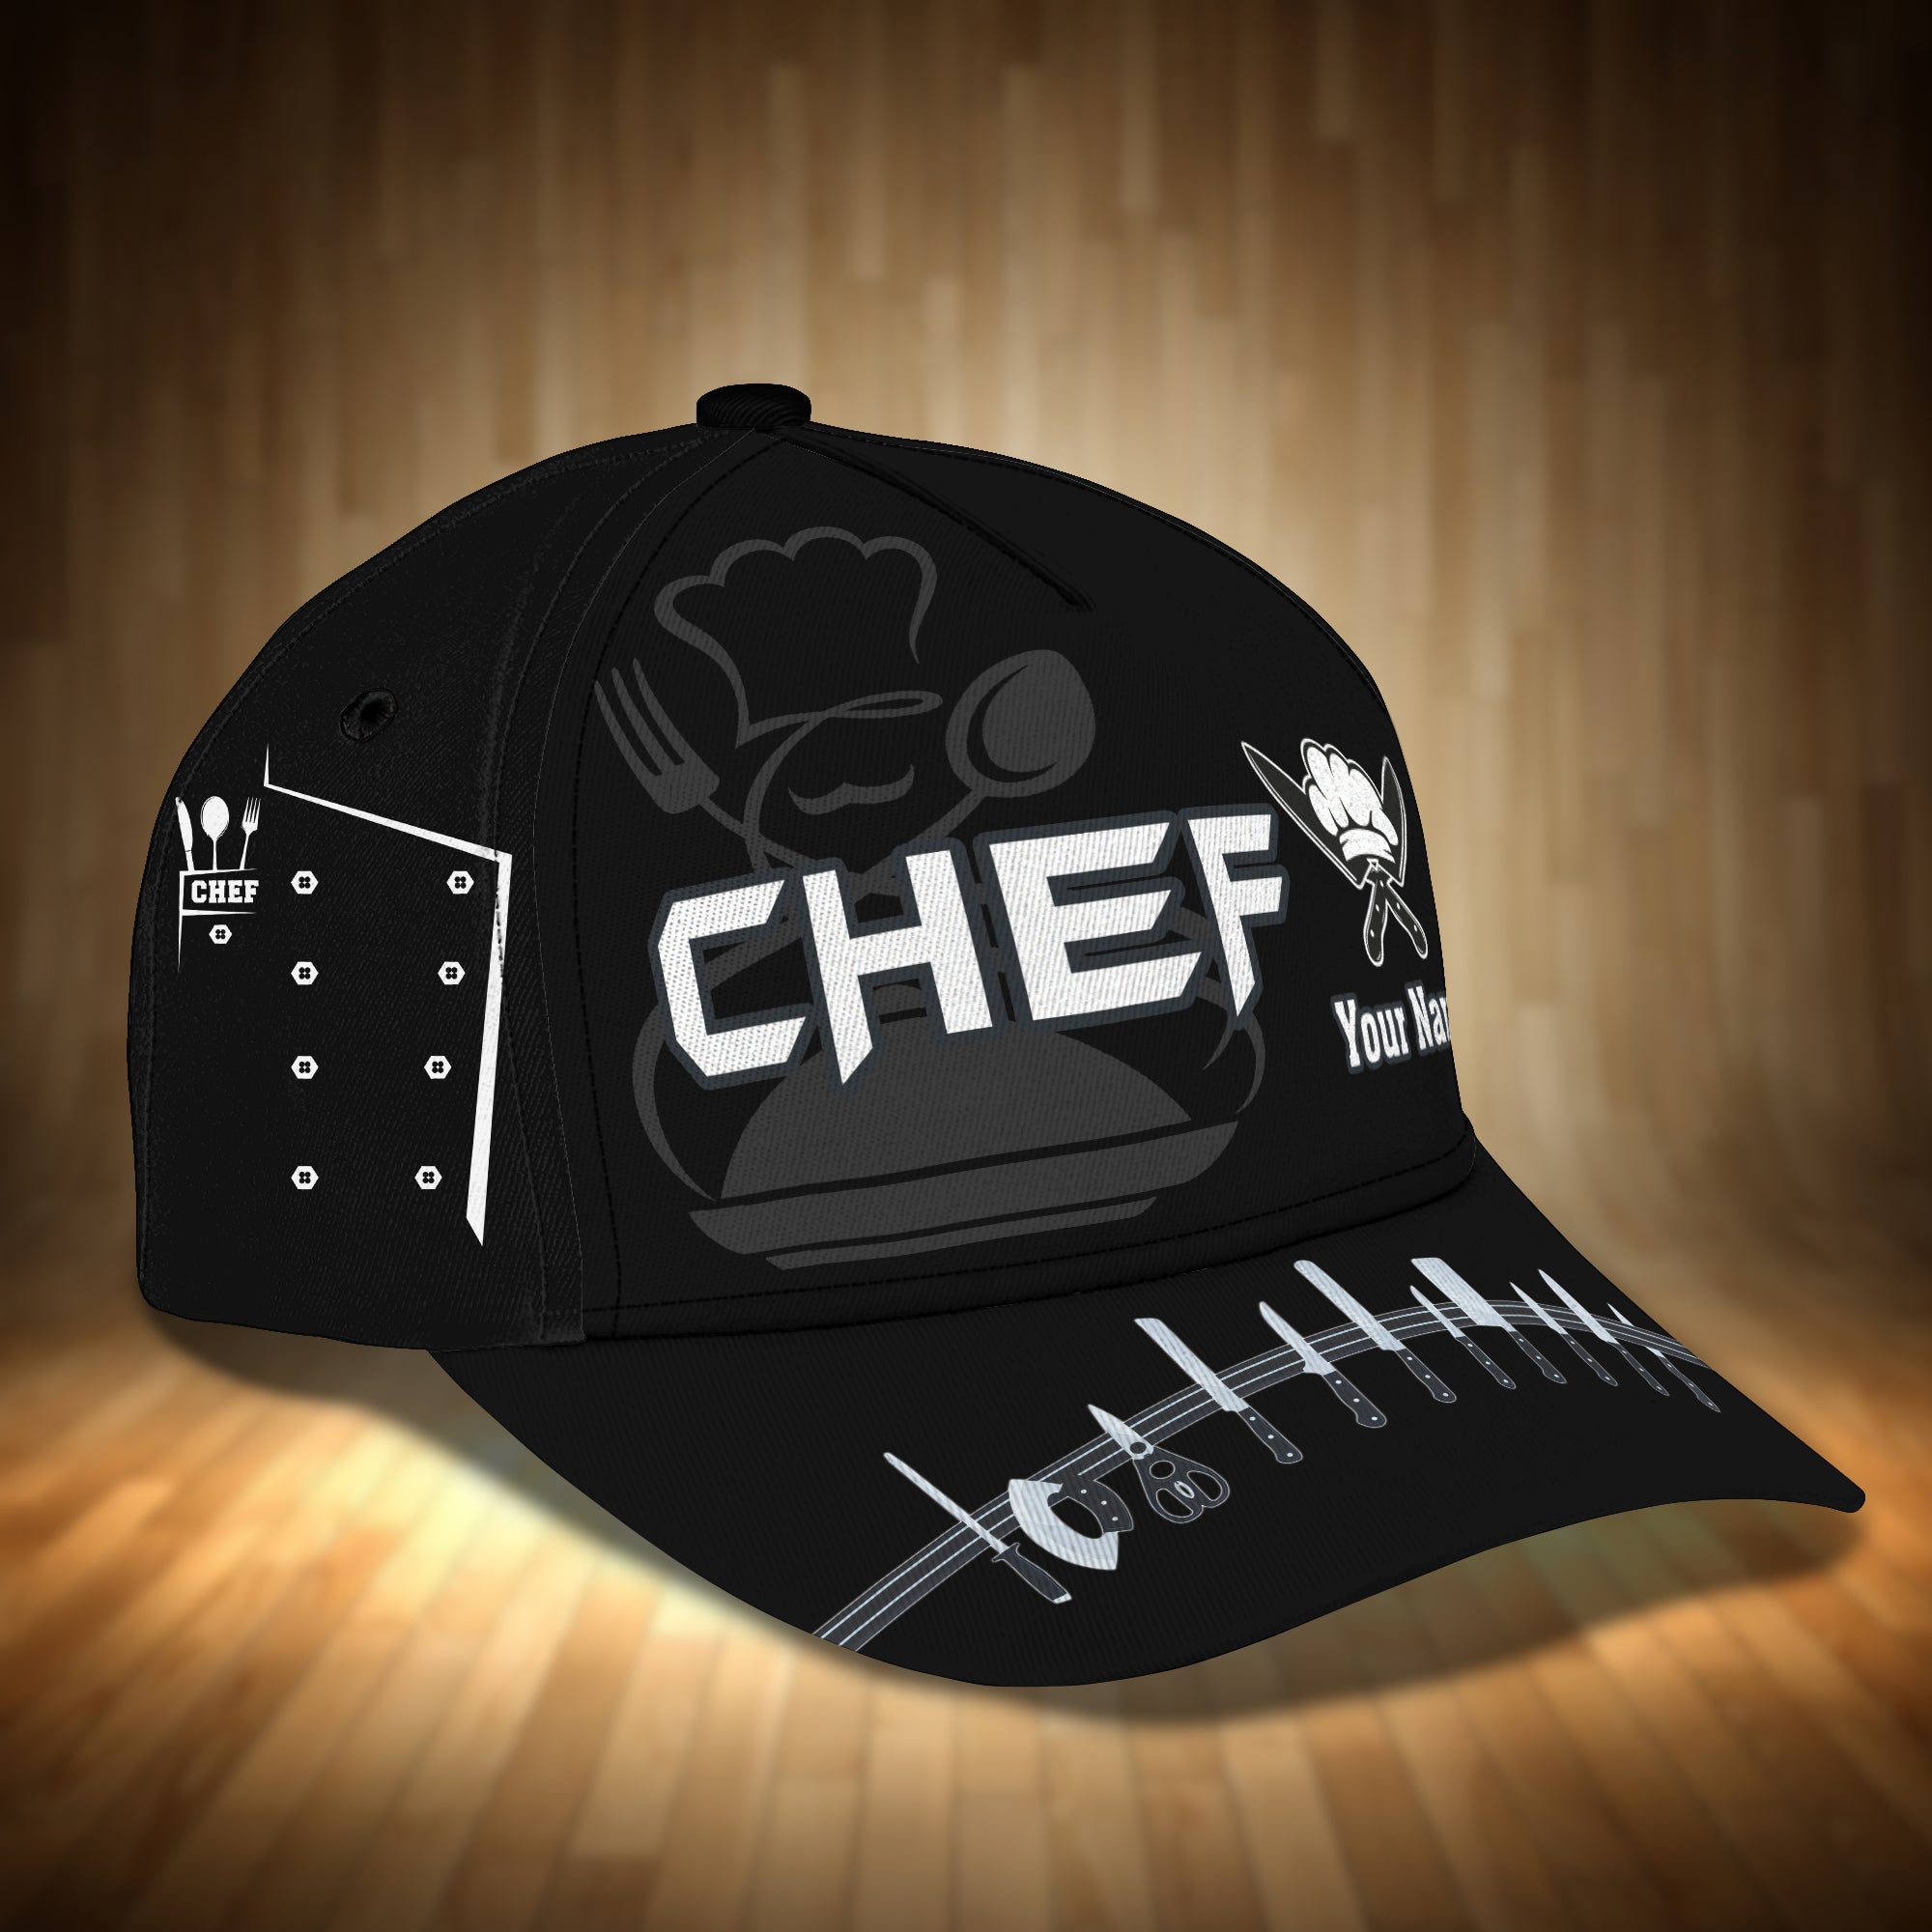 RINC98 - Personalized Name Cap - Chef12